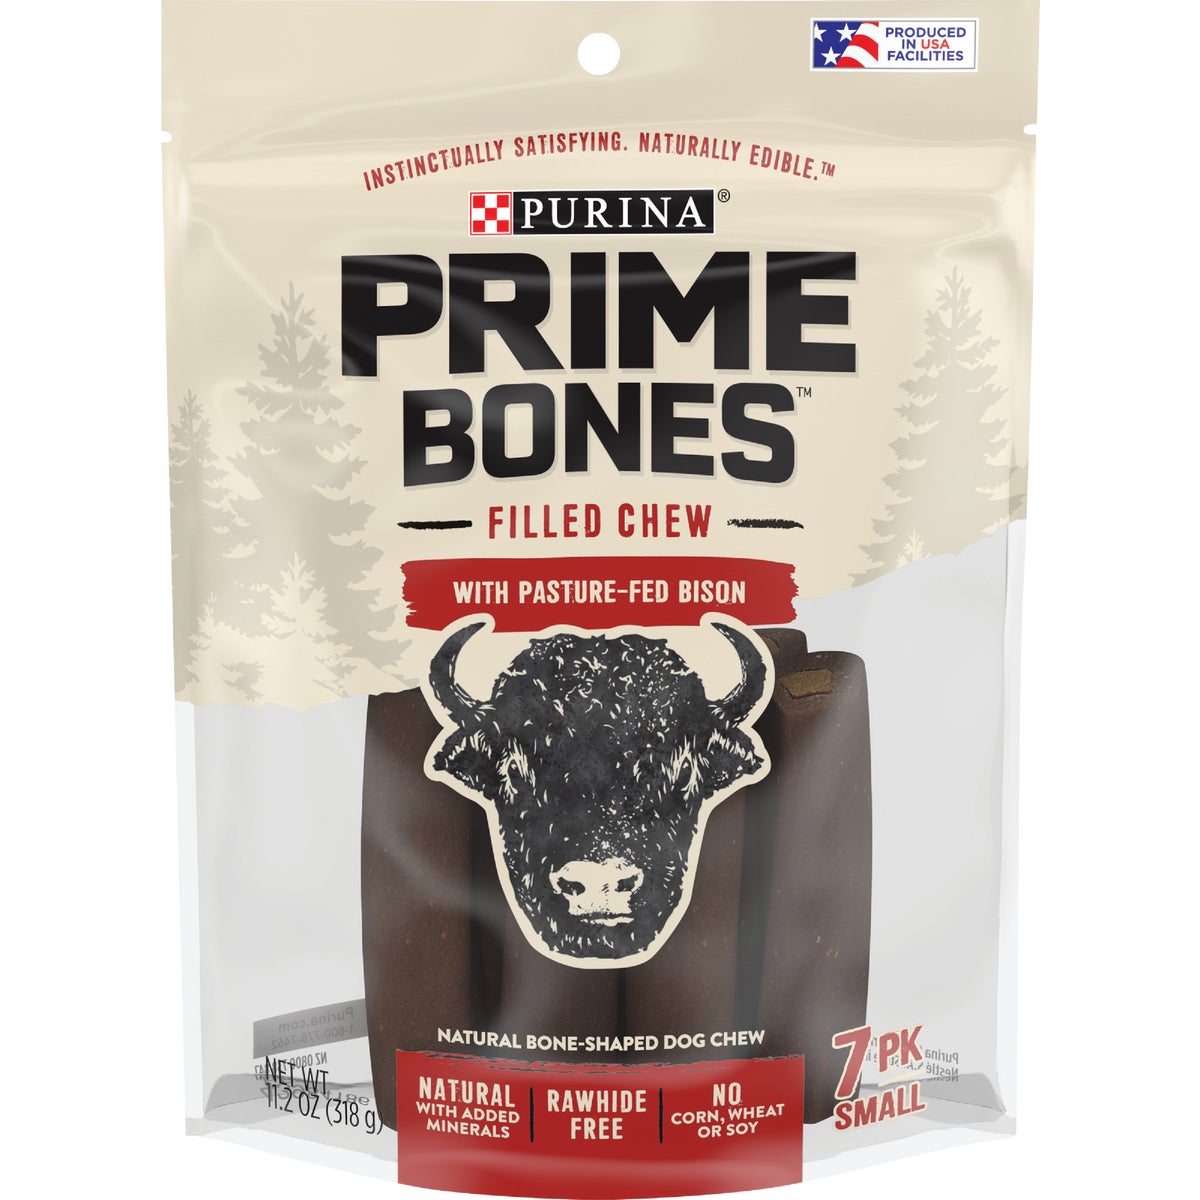 Purina Prime Bones Small Bison Flavor Filled Chew Dog Treat (7-Pack)